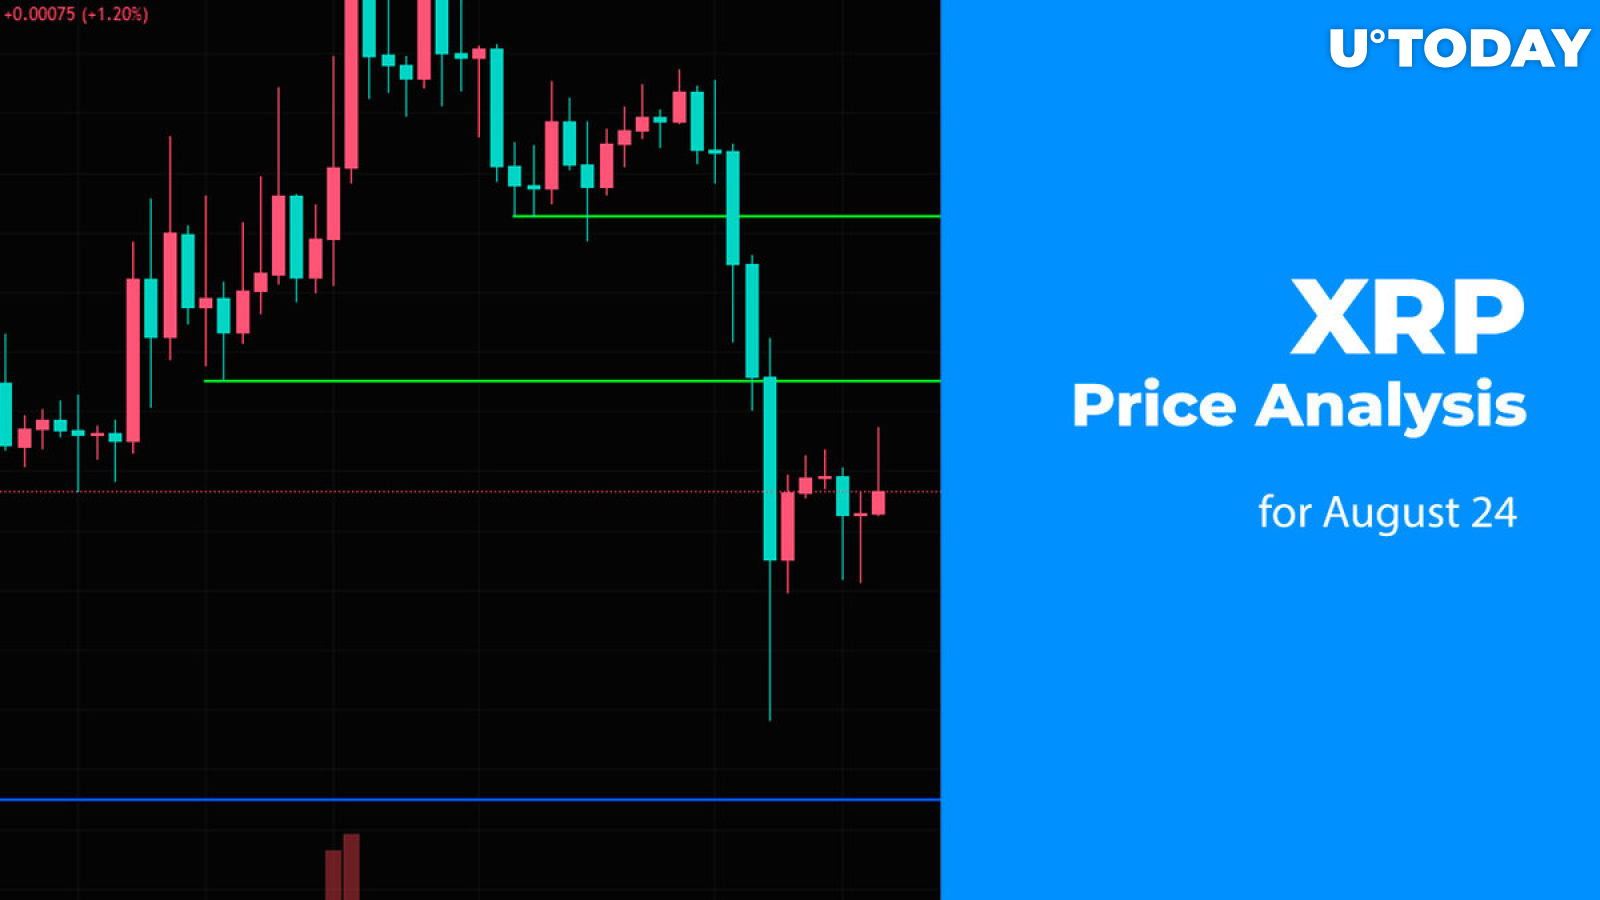 XRP Price Analysis for August 24